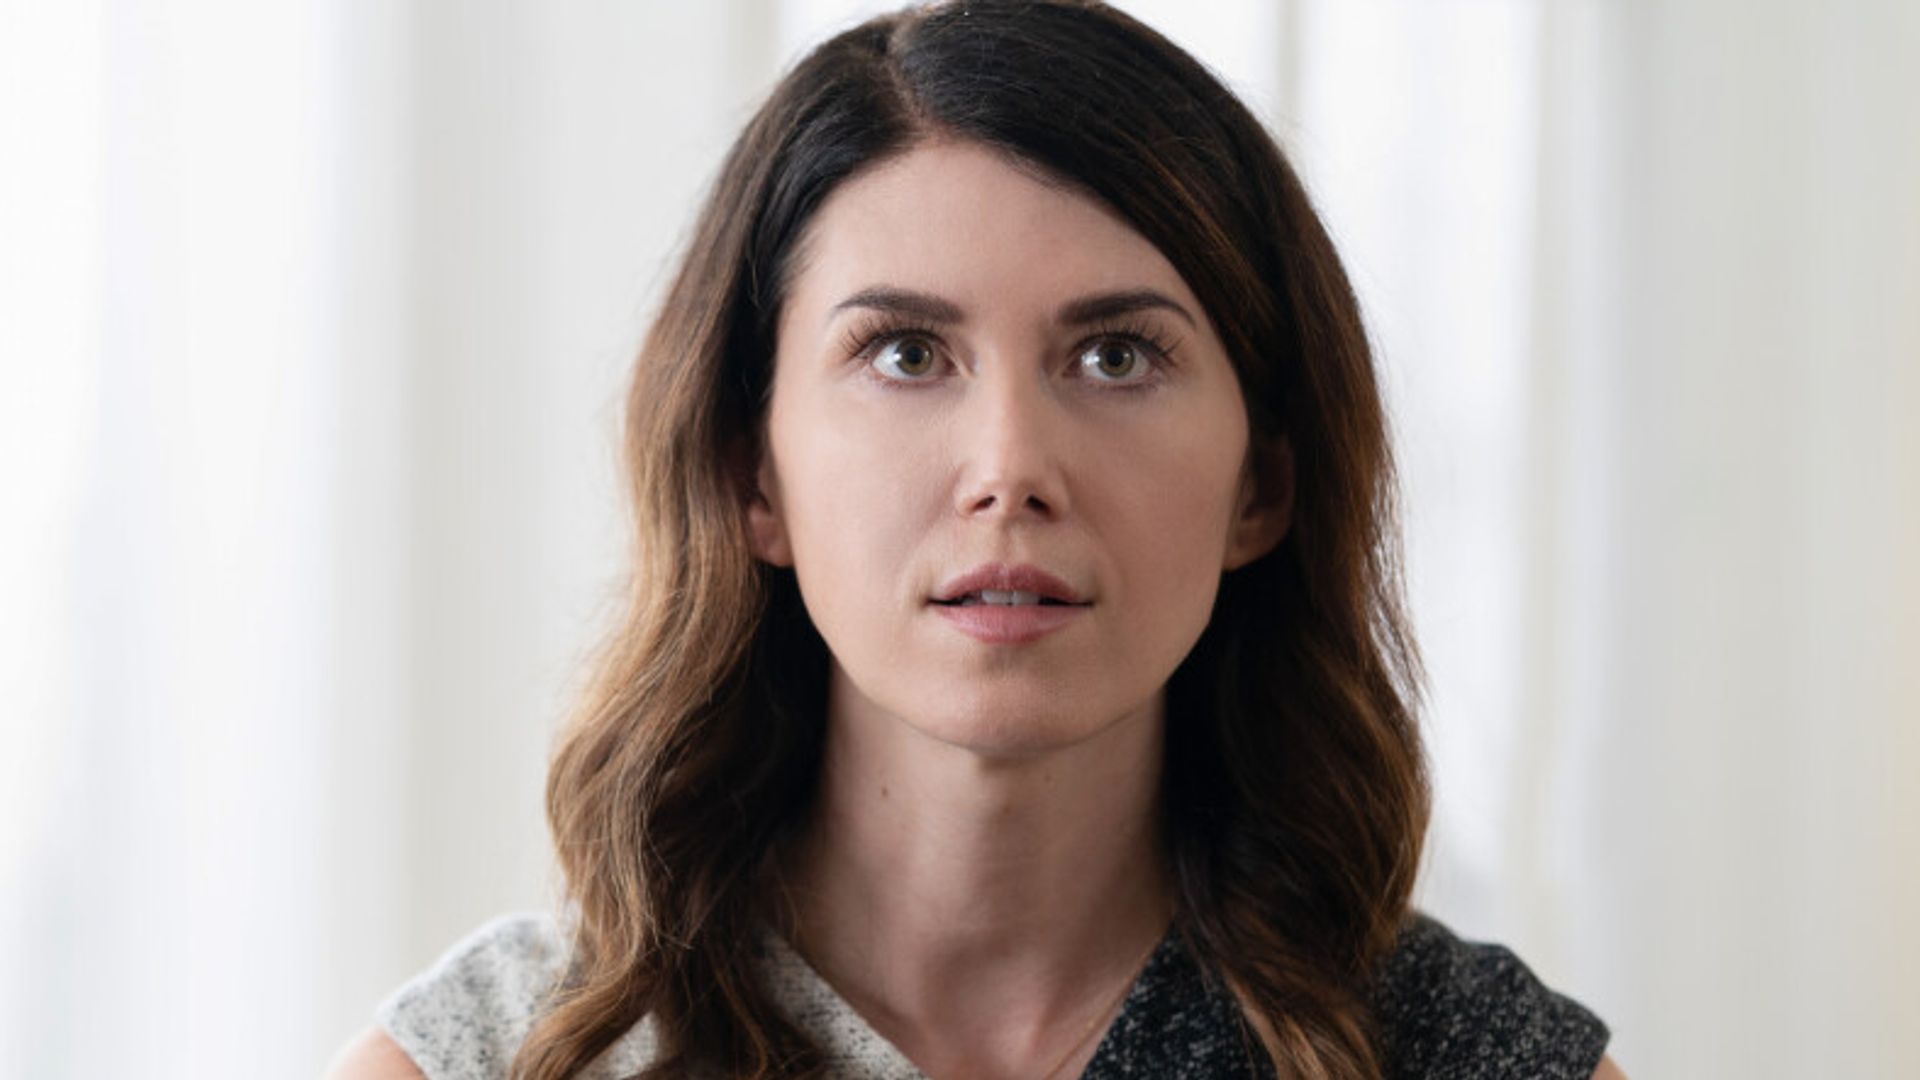 Jewel Staite as Abigial on Family Law